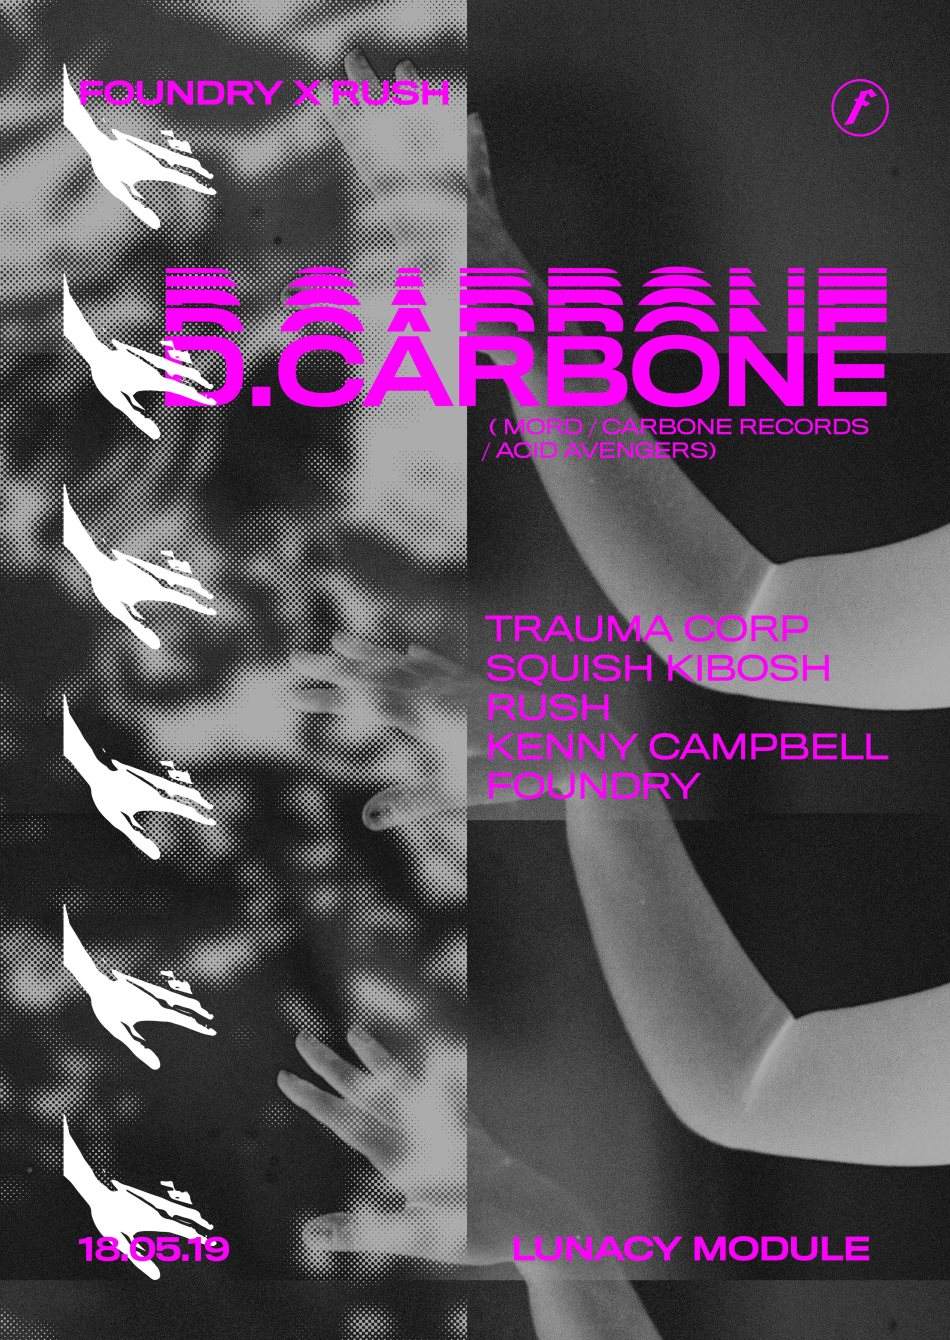 Foundry x Rush - D.Carbone (Mord,Carbone Records) - フライヤー表